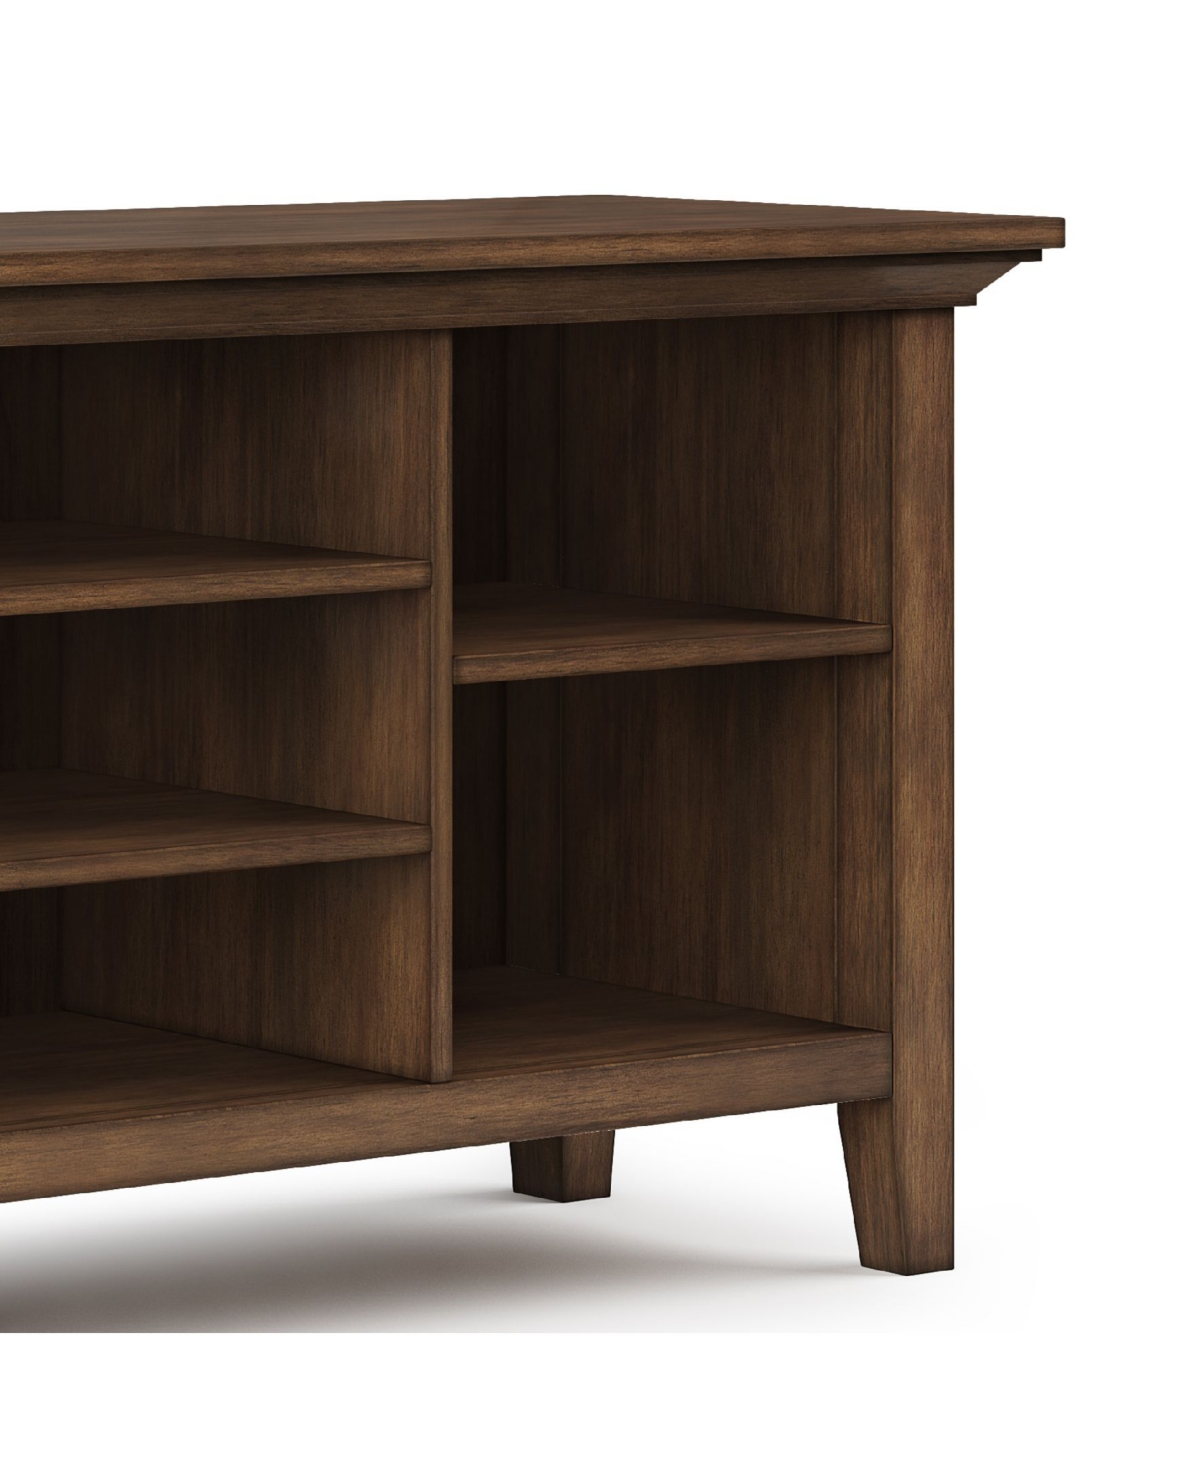 Shop Simpli Home Redmond Solid Wood Tv Media Stand With Open Shelves In Rustic Natural Brown